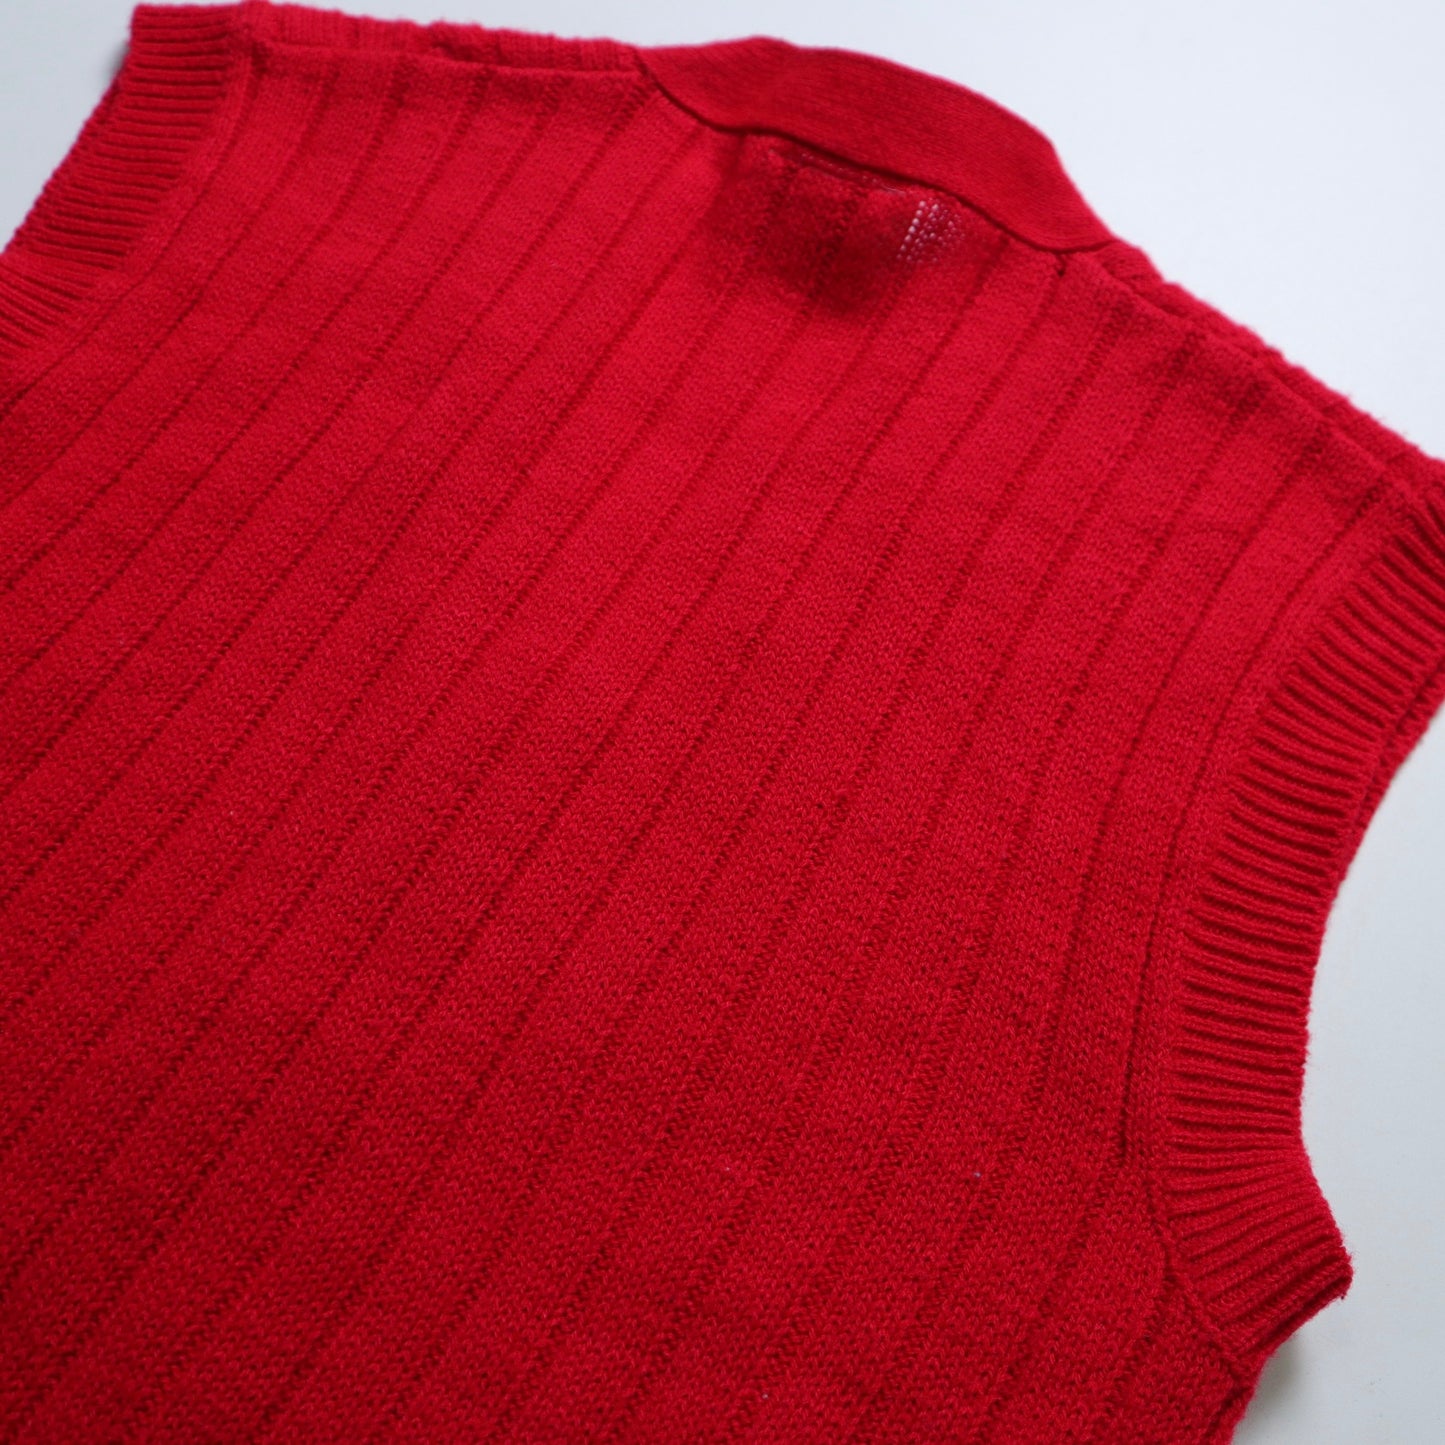 70's red hemp rope knitted vest plain breasted vest made in Taiwan